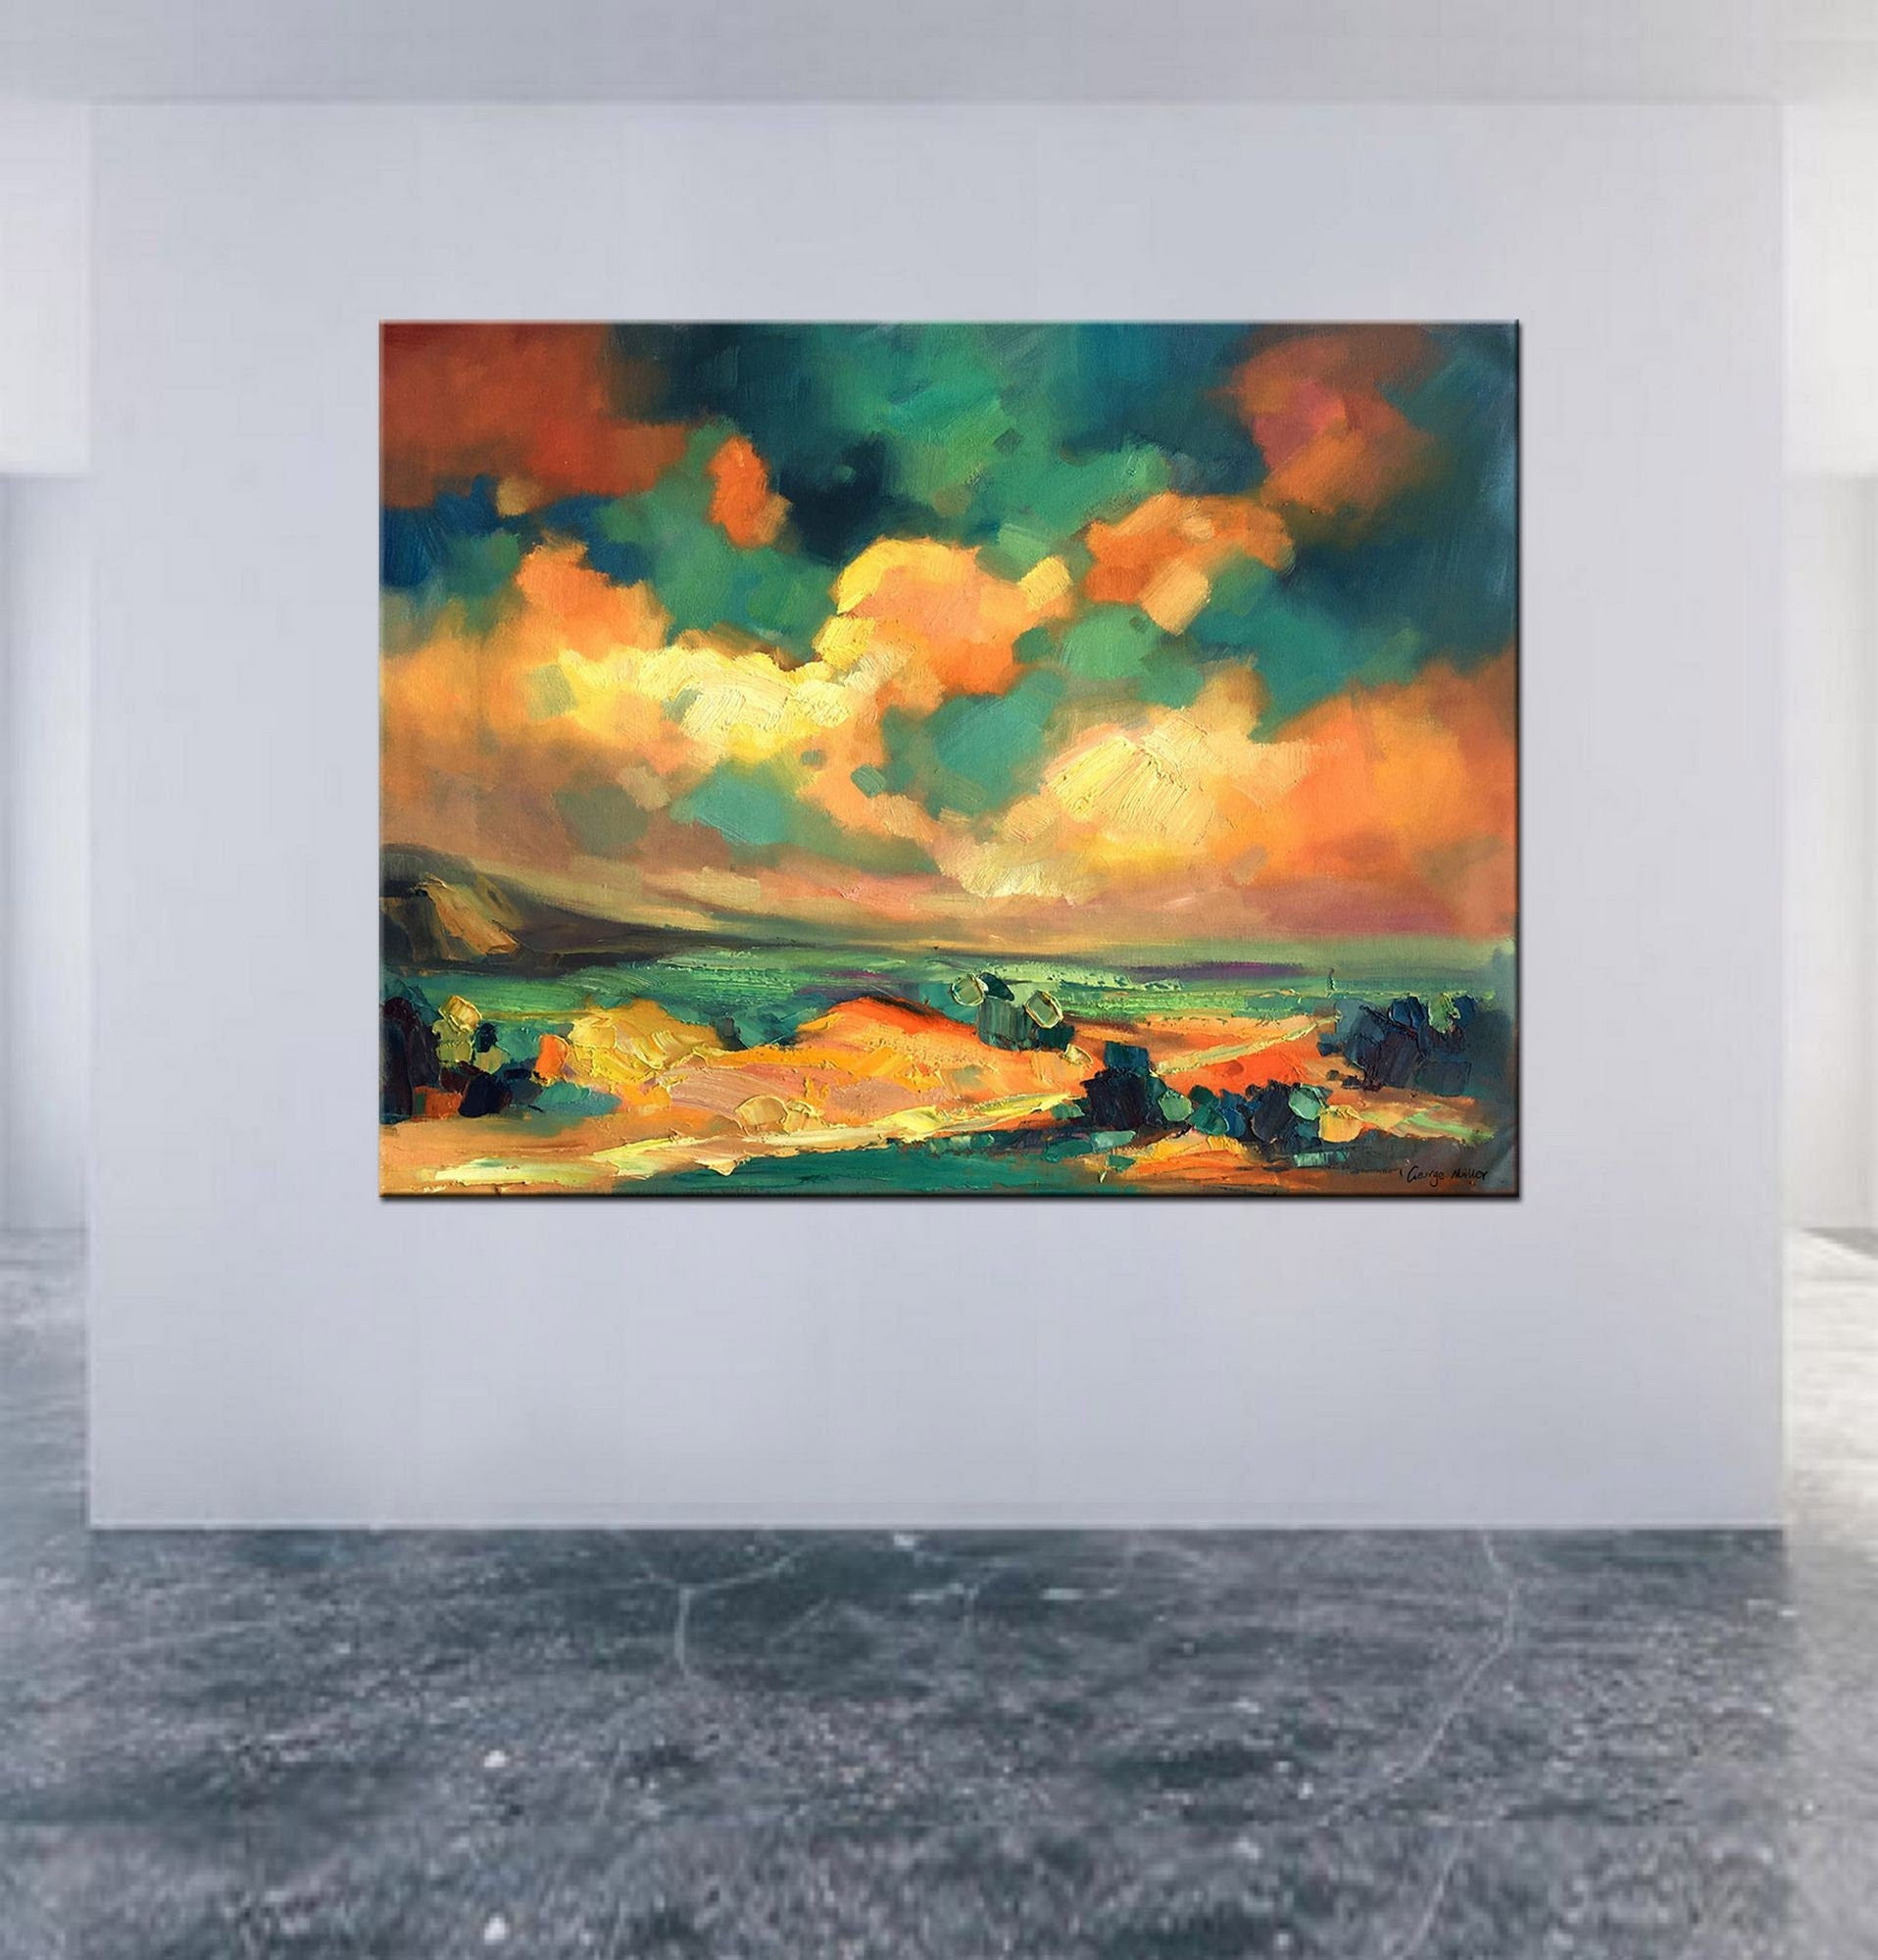 Large Abstract Landscape Painting, Abstract Oil Painting, Original Oil Painting Landscape, Wall Art, Wall Decor, Oil Painting Original